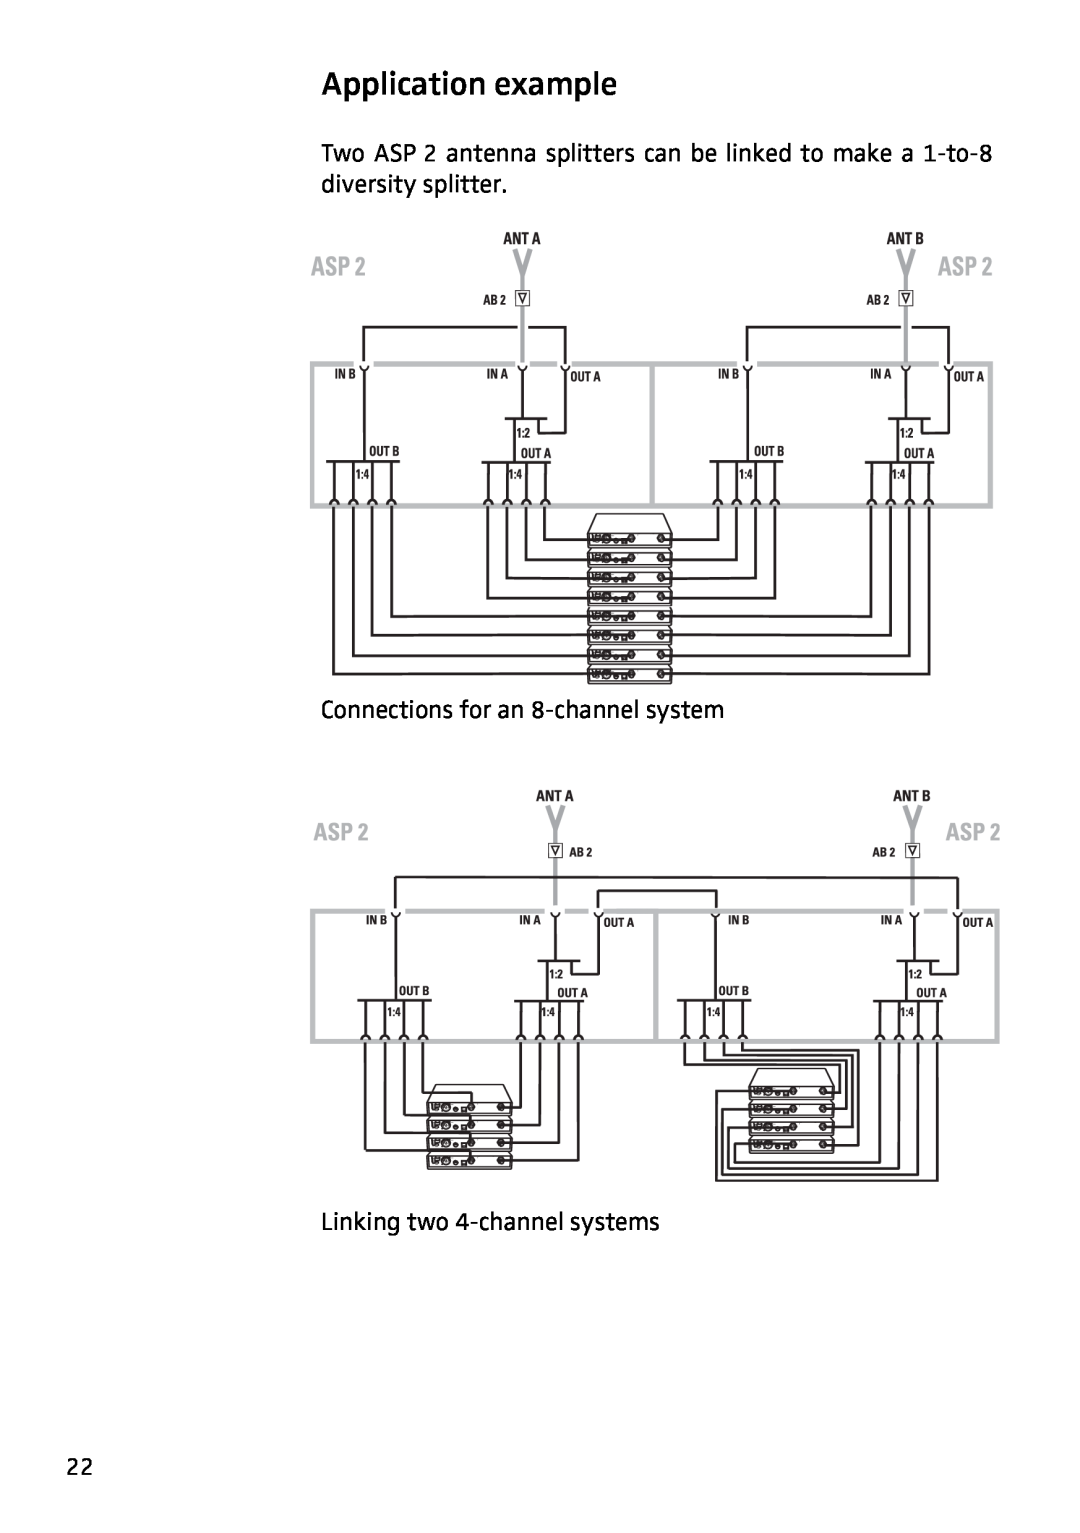 Sennheiser ASP 2 manual Application example, Connections for an 8-channelsystem, Linking two 4-channelsystems 